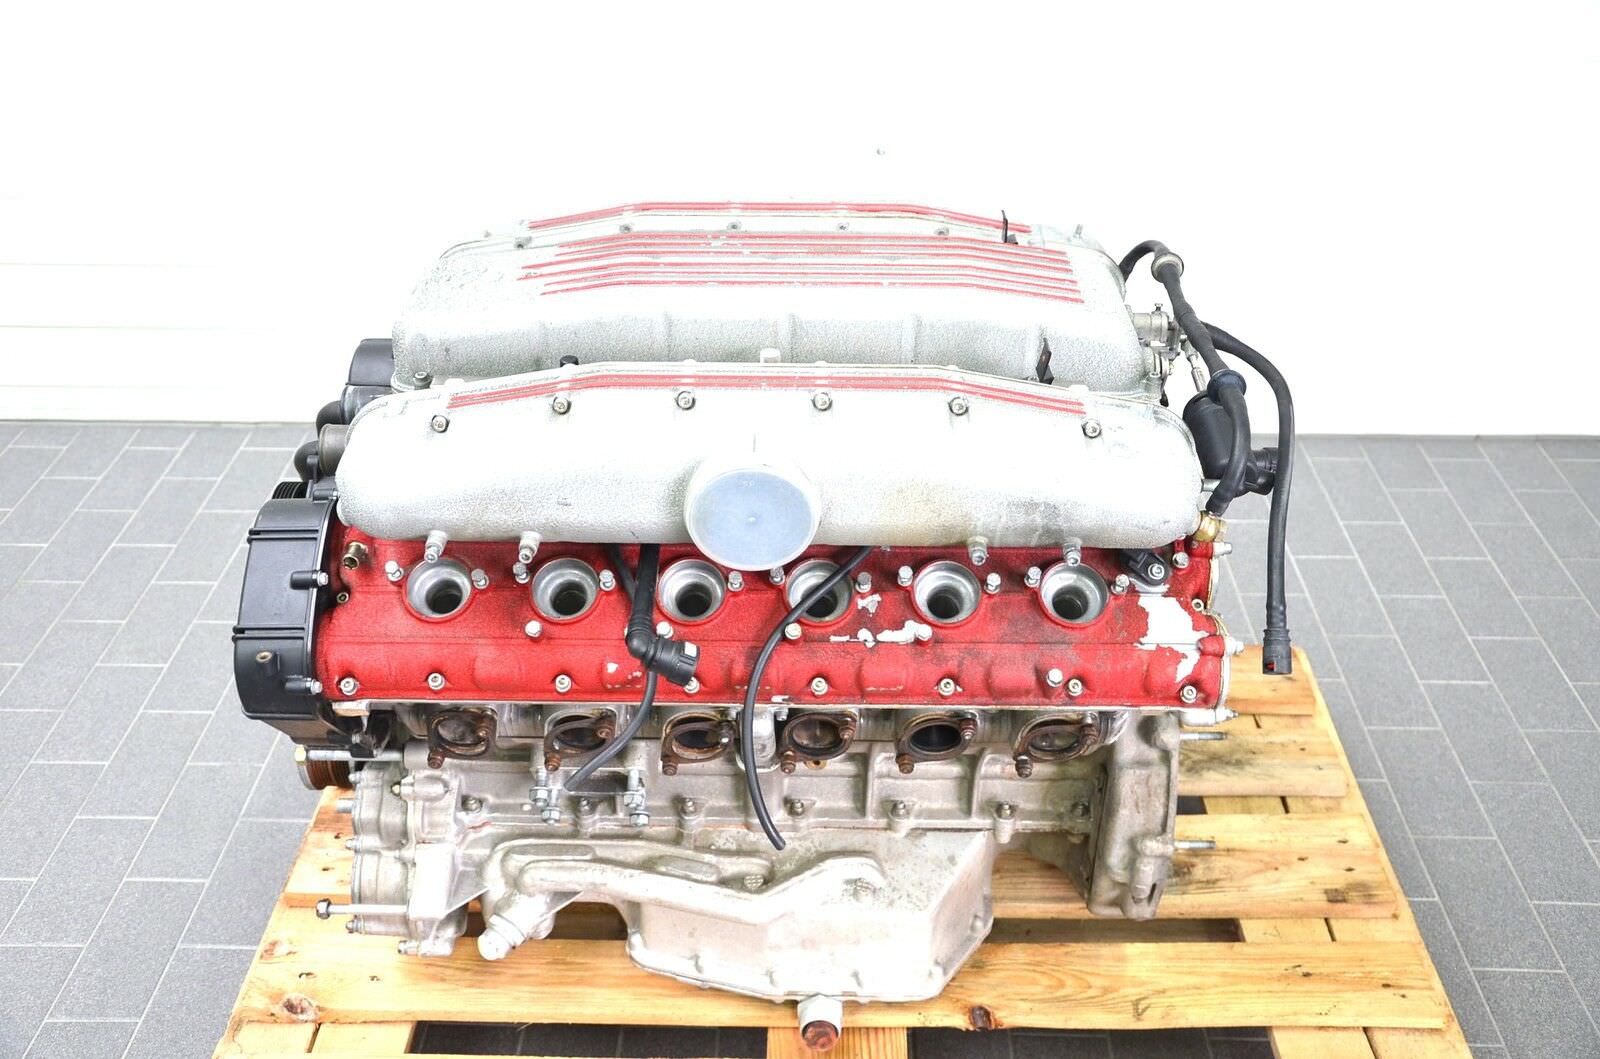 There's A 500+ HP Ferrari 575M V12 Engine For Sale on eBay